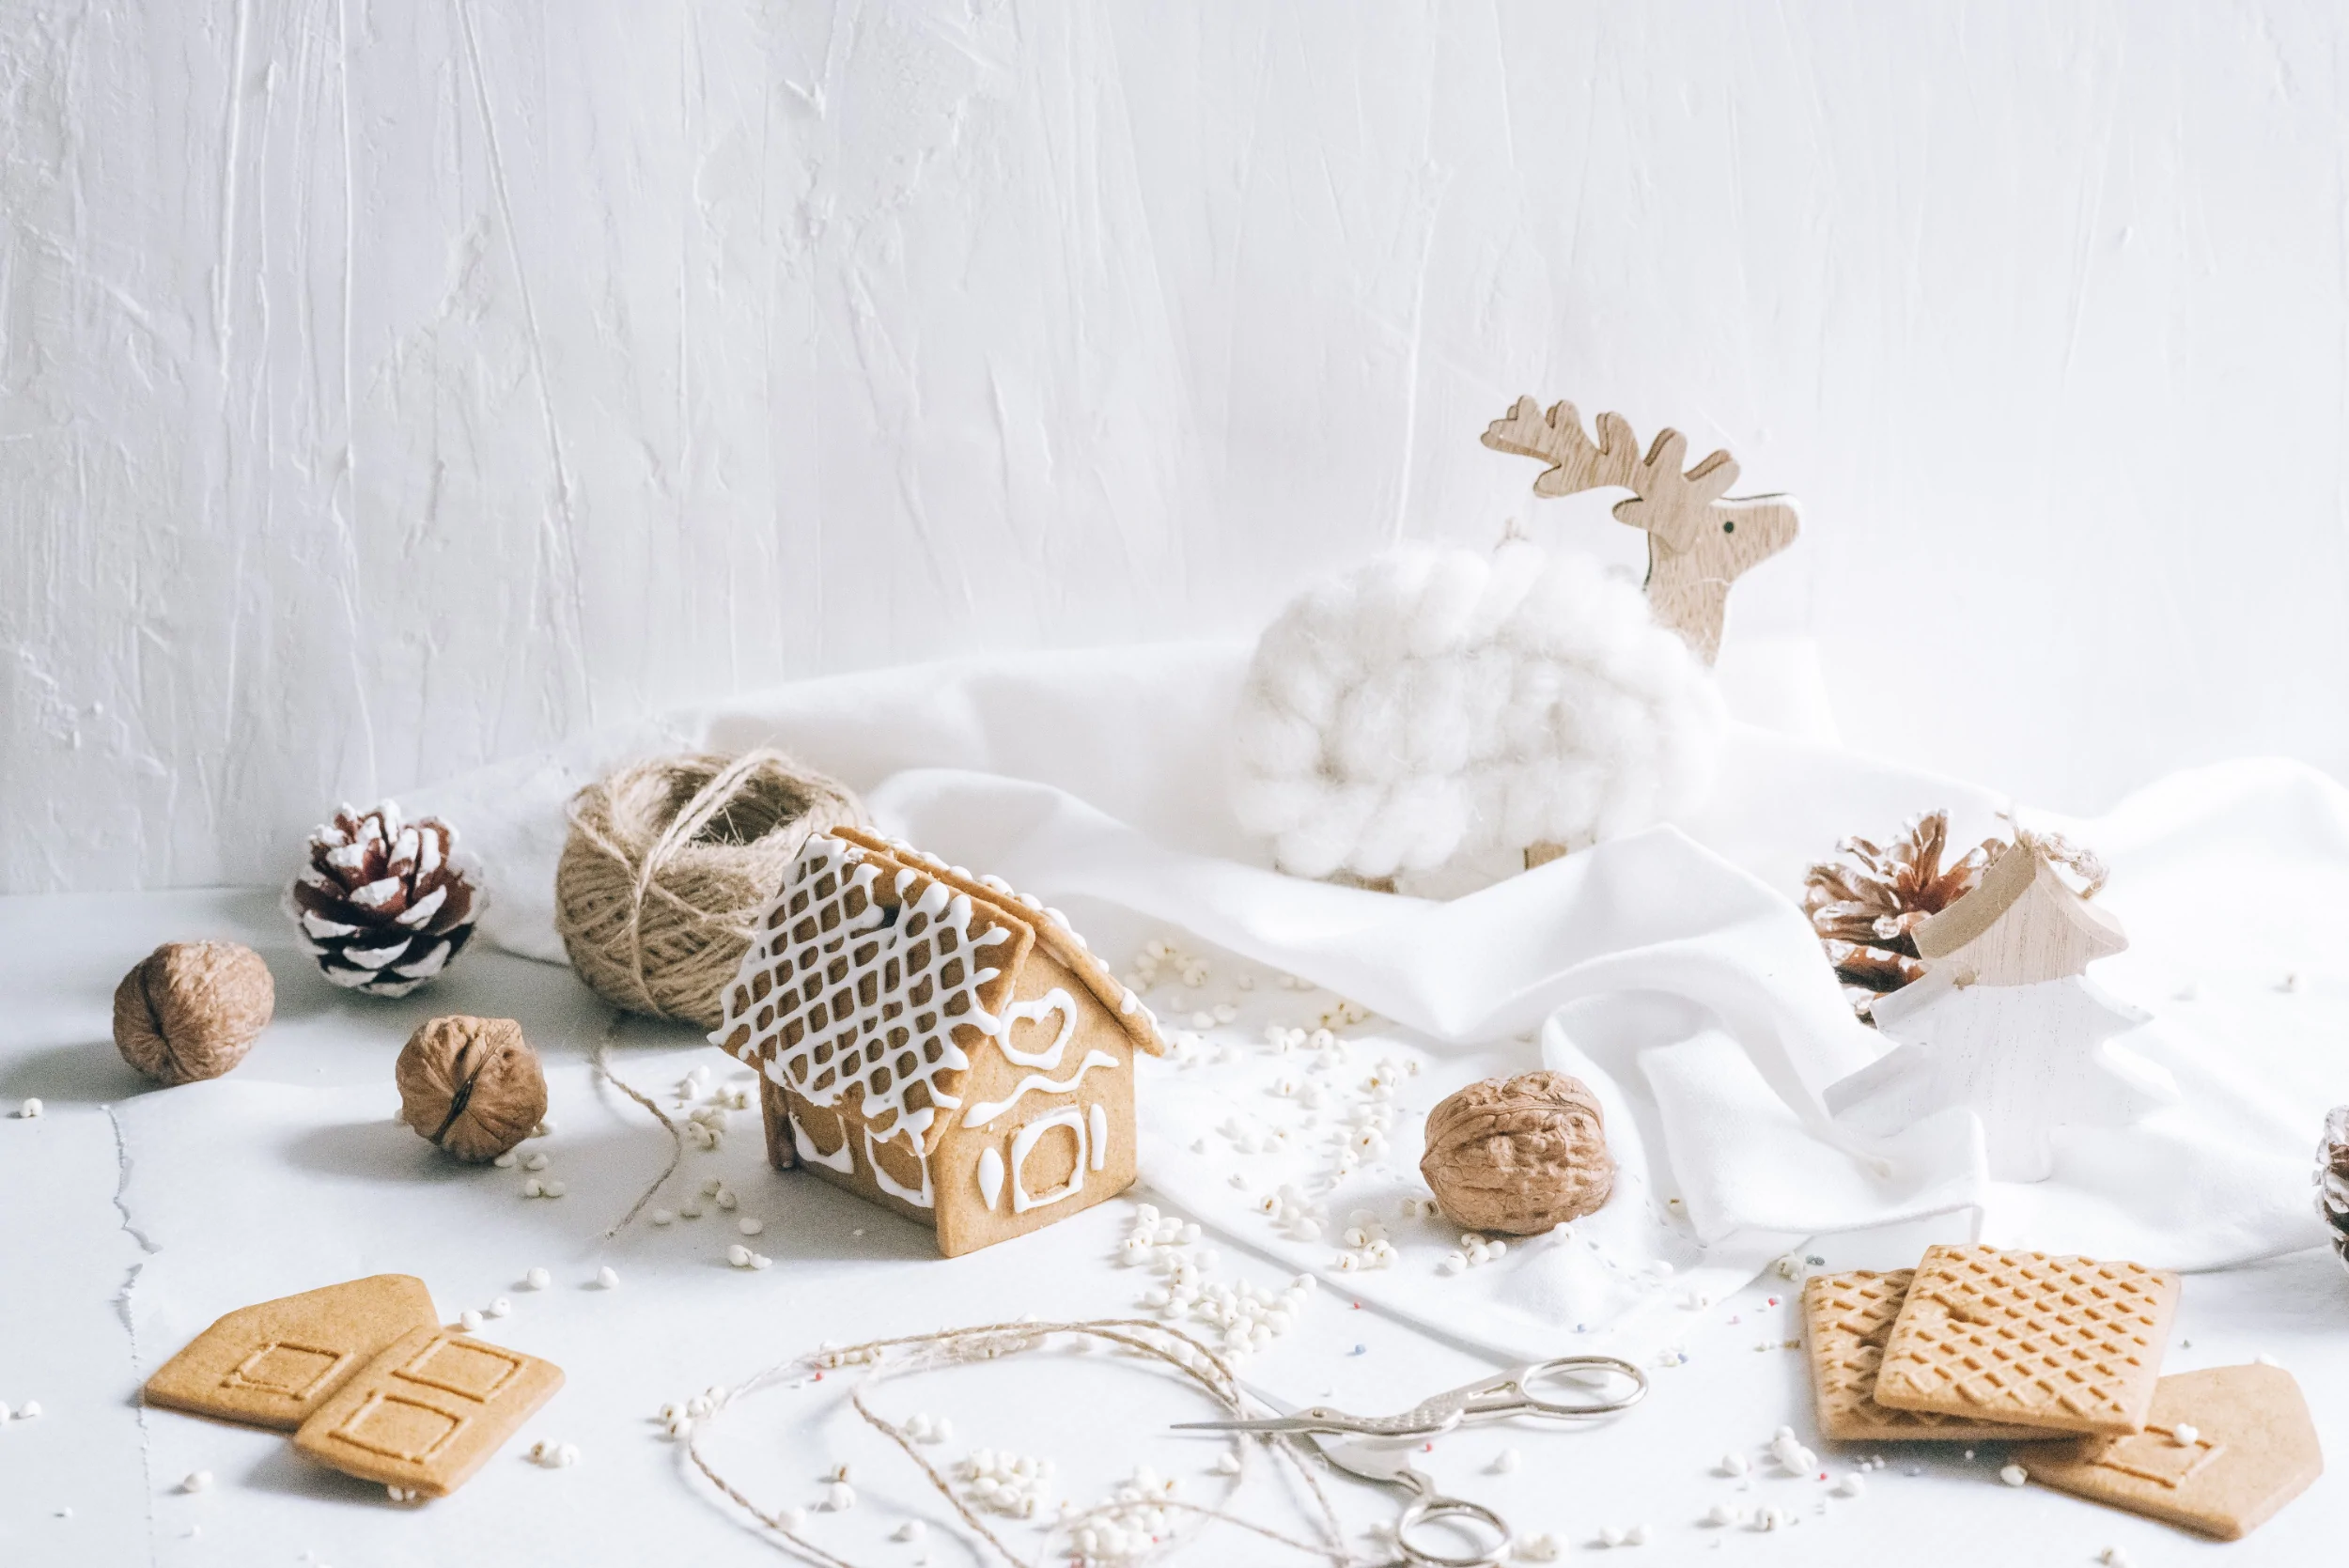 Array of natural colored holiday items including treats and ornaments on a white surface